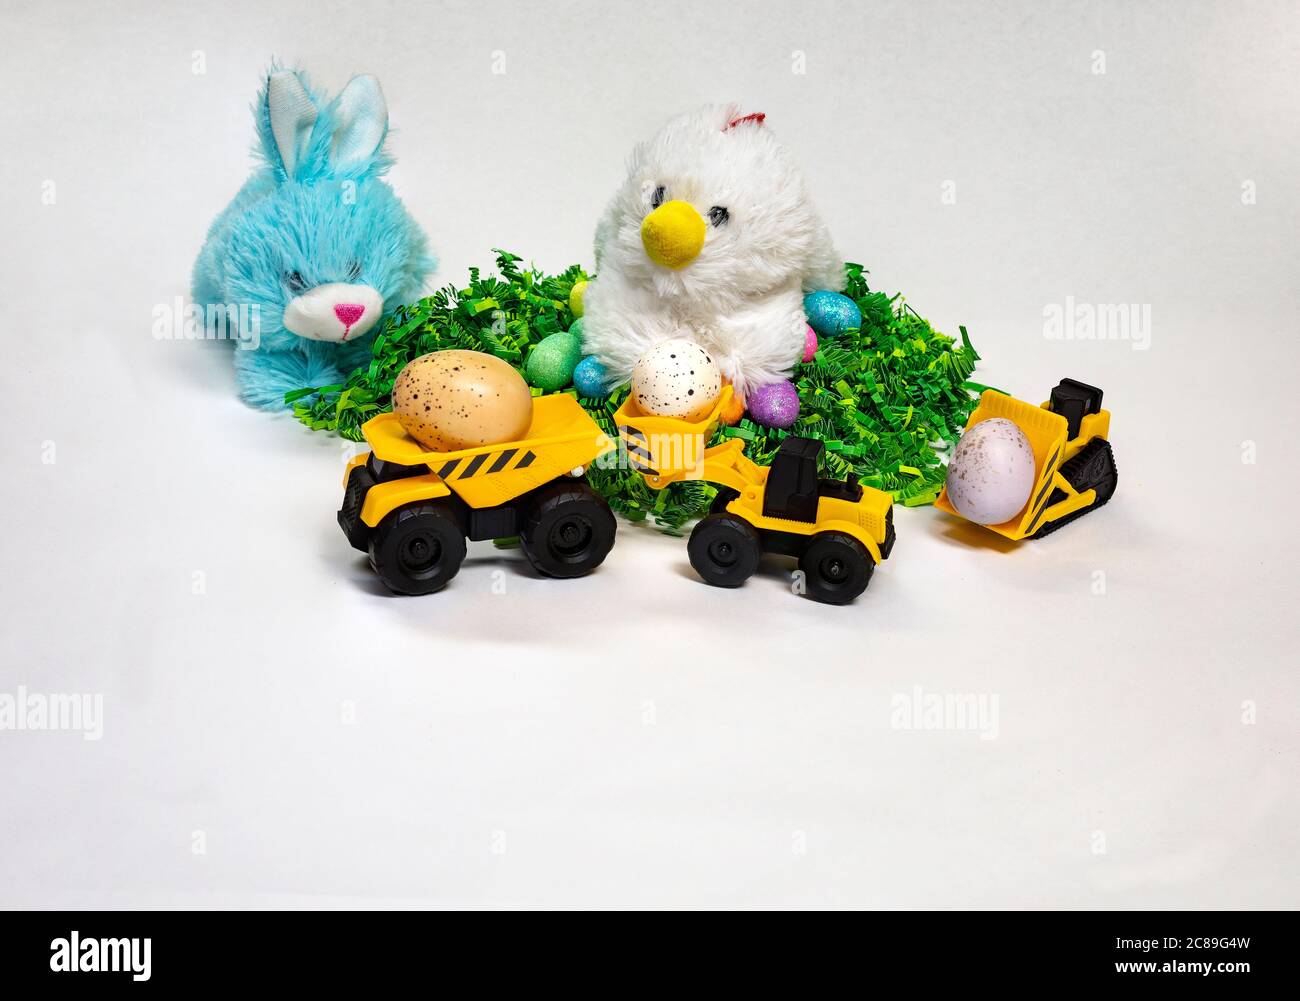 Easter themed photo of stuffed bunny and hen with decorated Easter eggs and a child's toy construction vehicles. Stock Photo